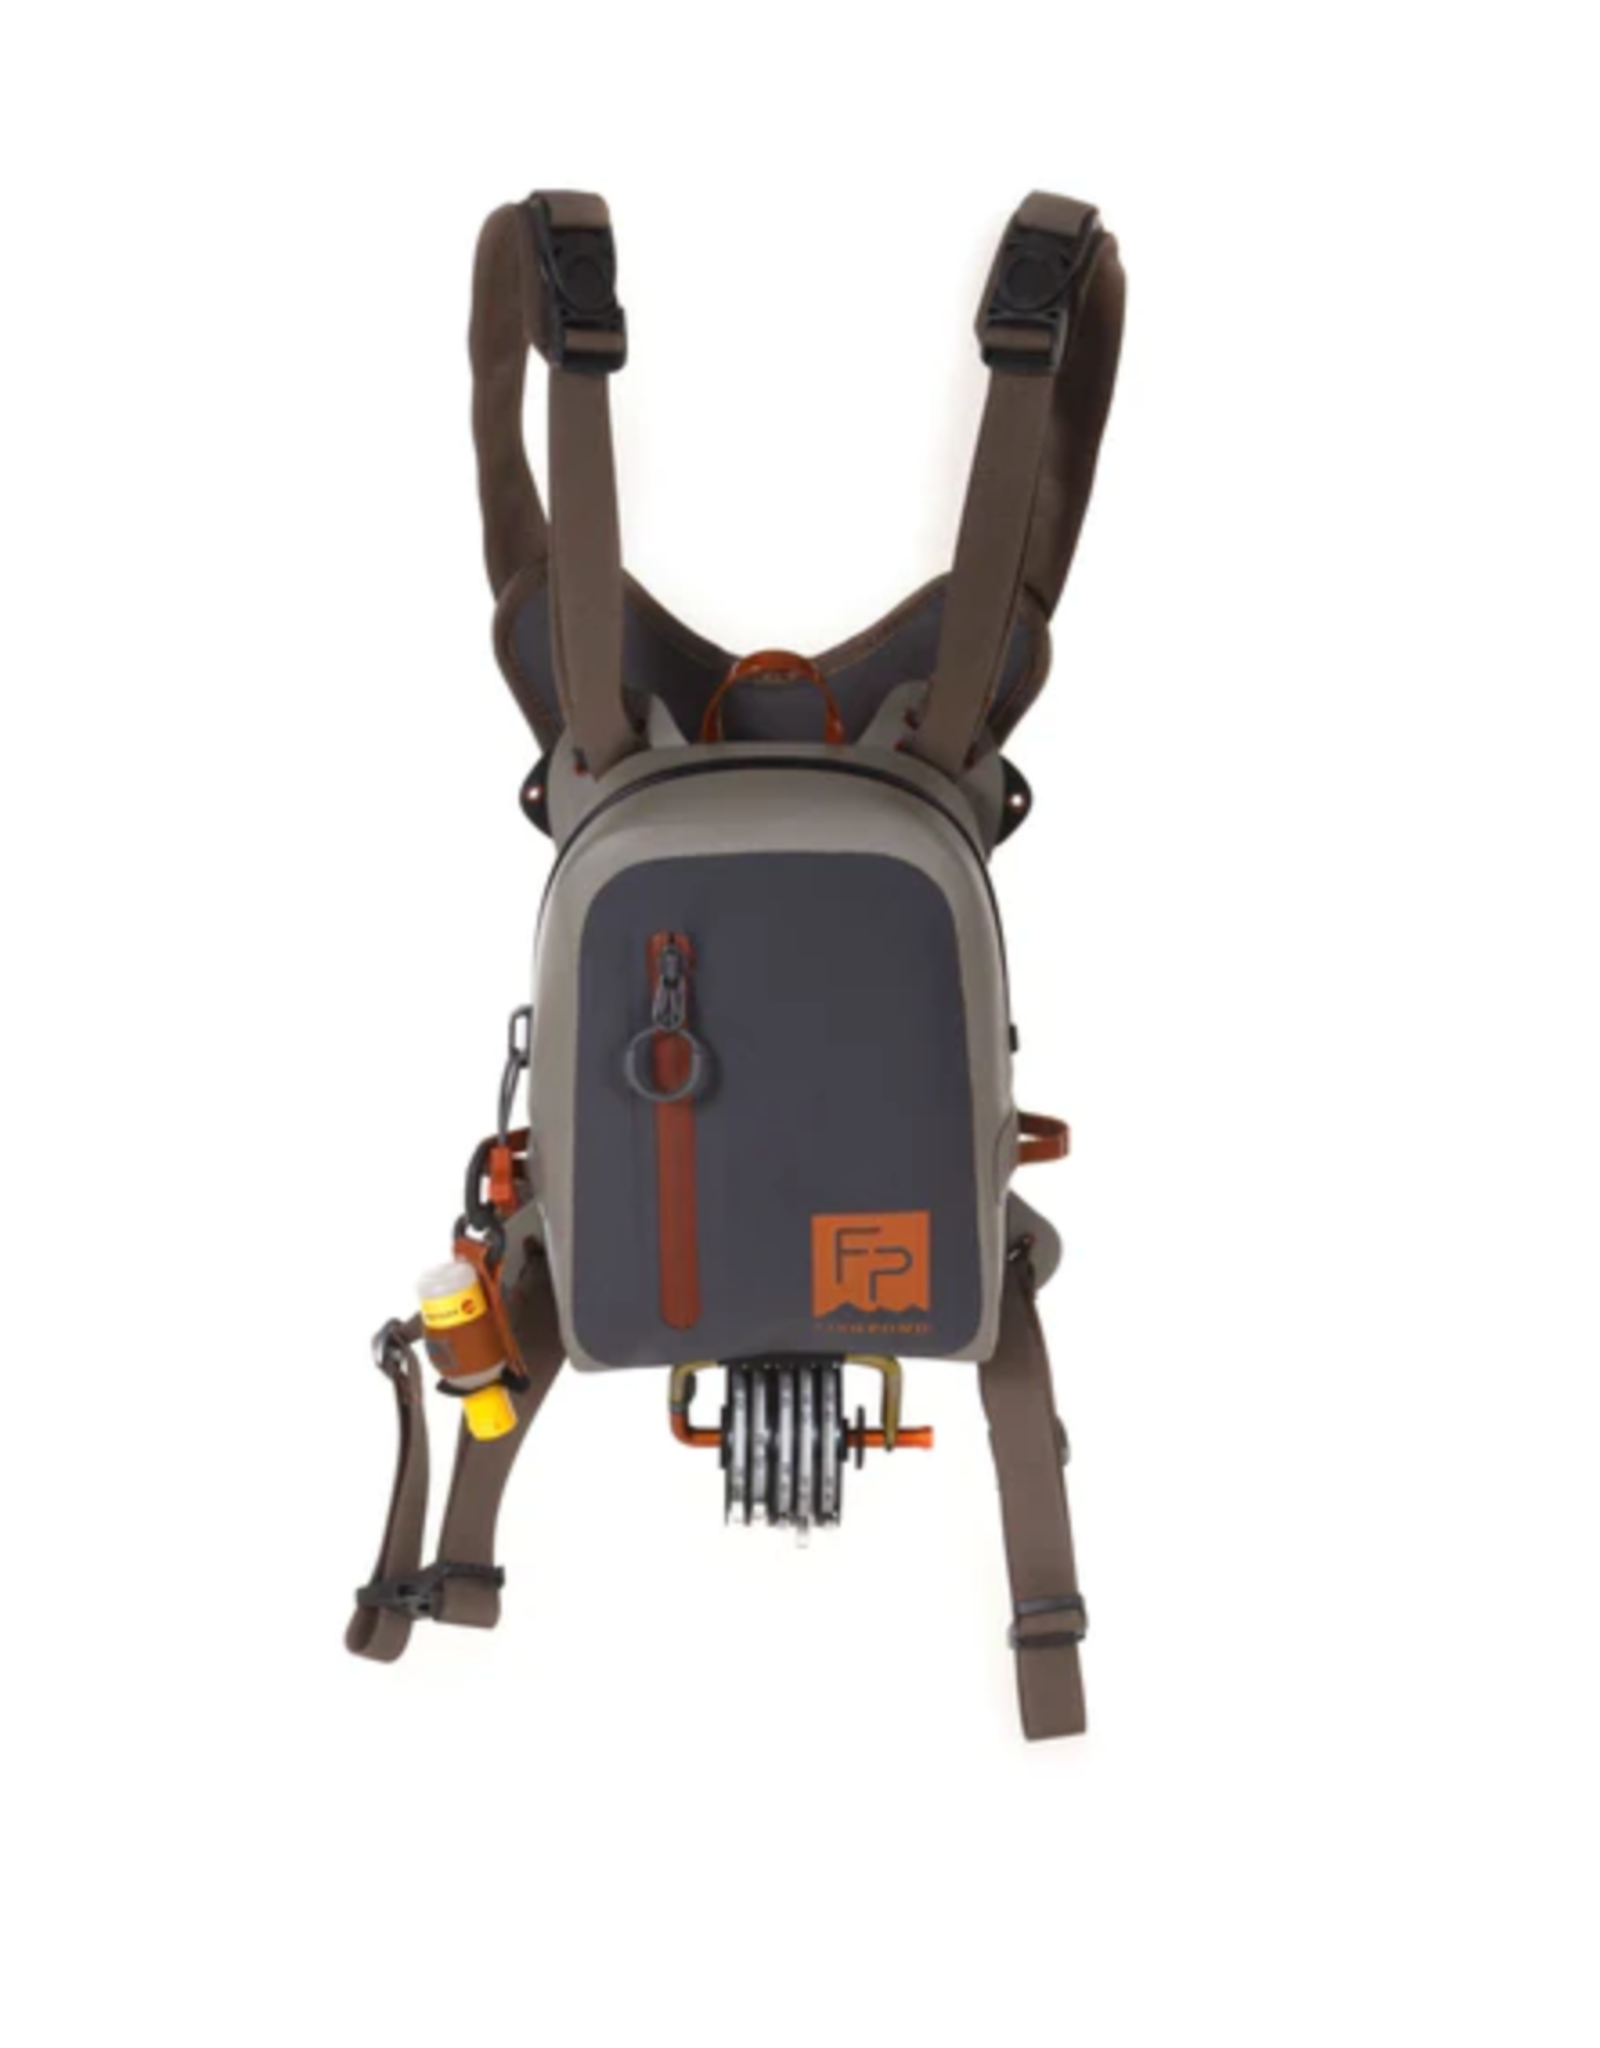 Fishpond Fishpond Thunderhead Submersible Chest Pack - Eco Shale